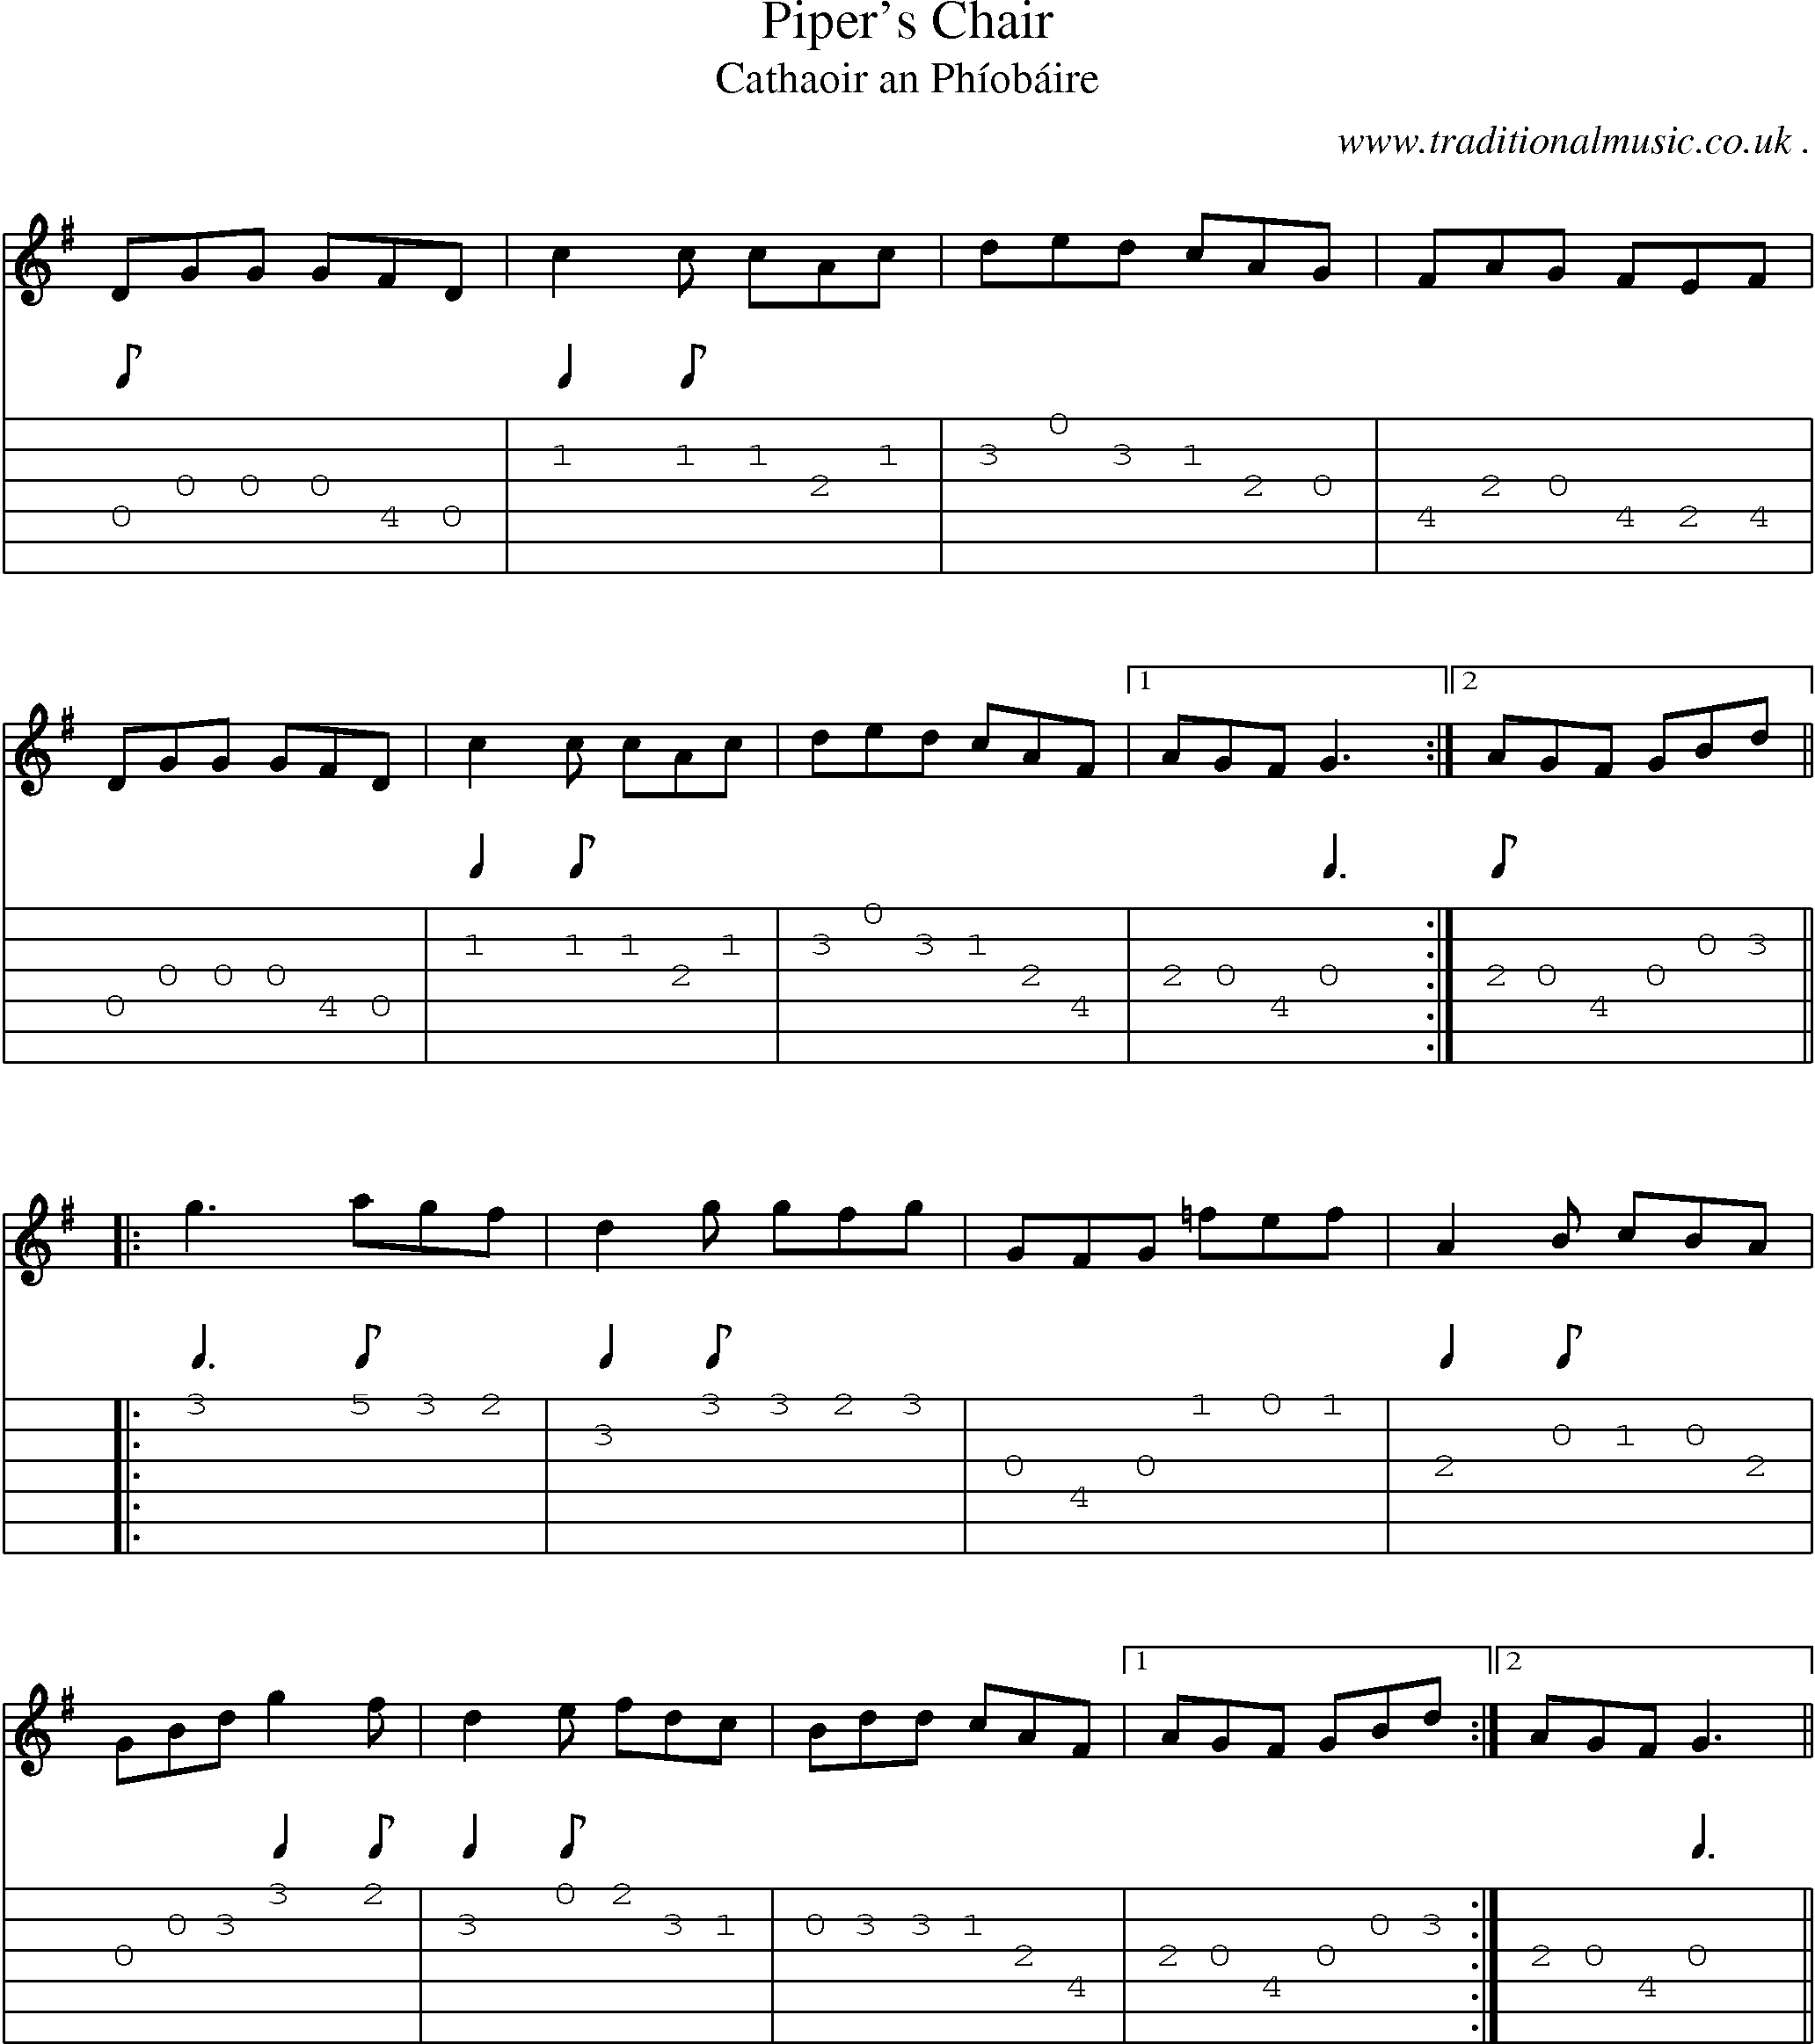 Sheet-Music and Guitar Tabs for Pipers Chair